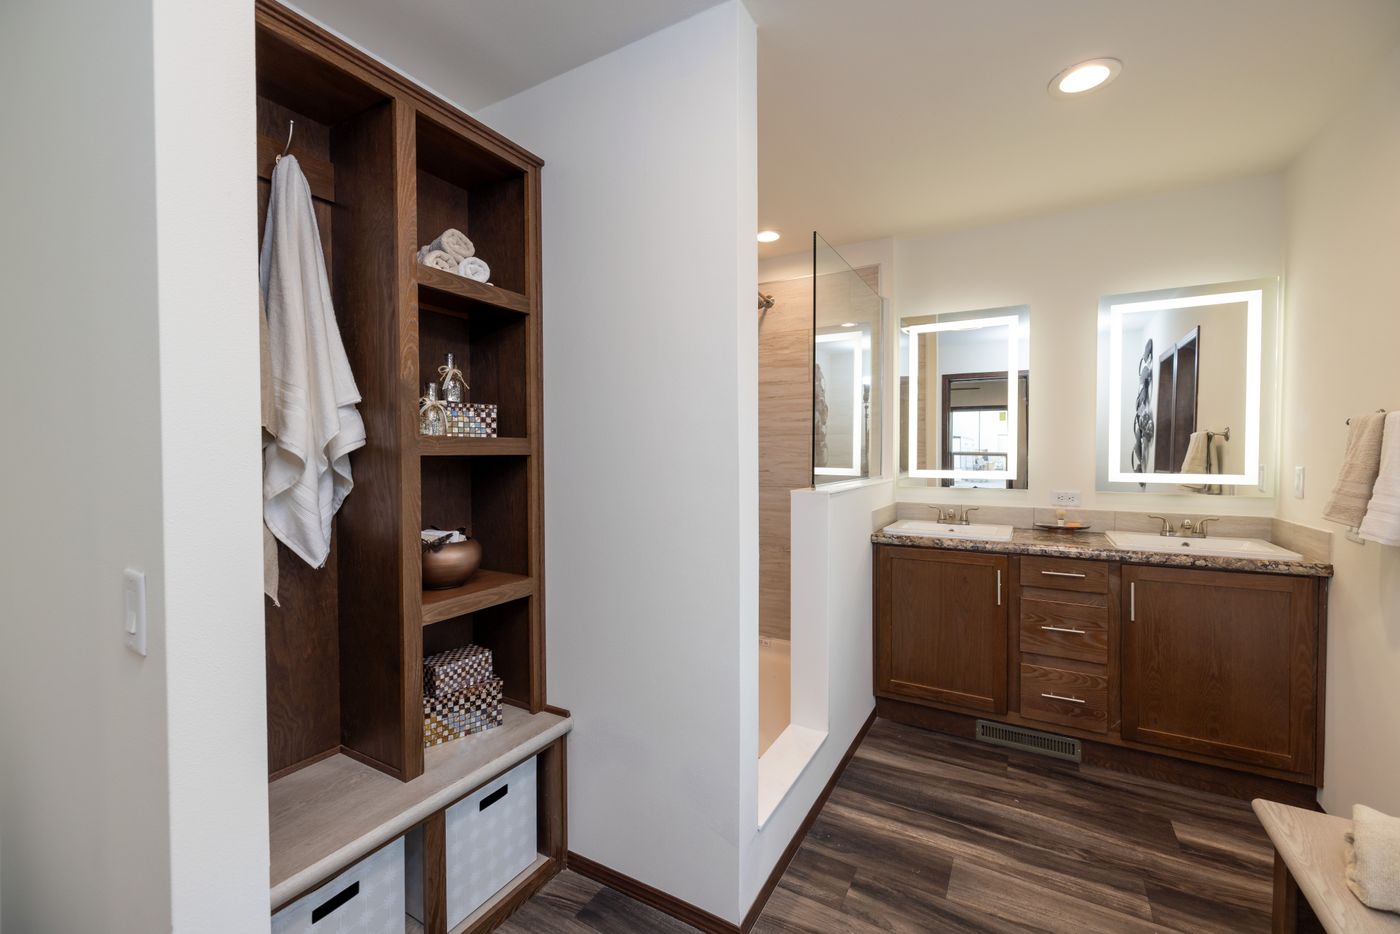 The LEGACY 327 Primary Bathroom. This Manufactured Mobile Home features 3 bedrooms and 2 baths.